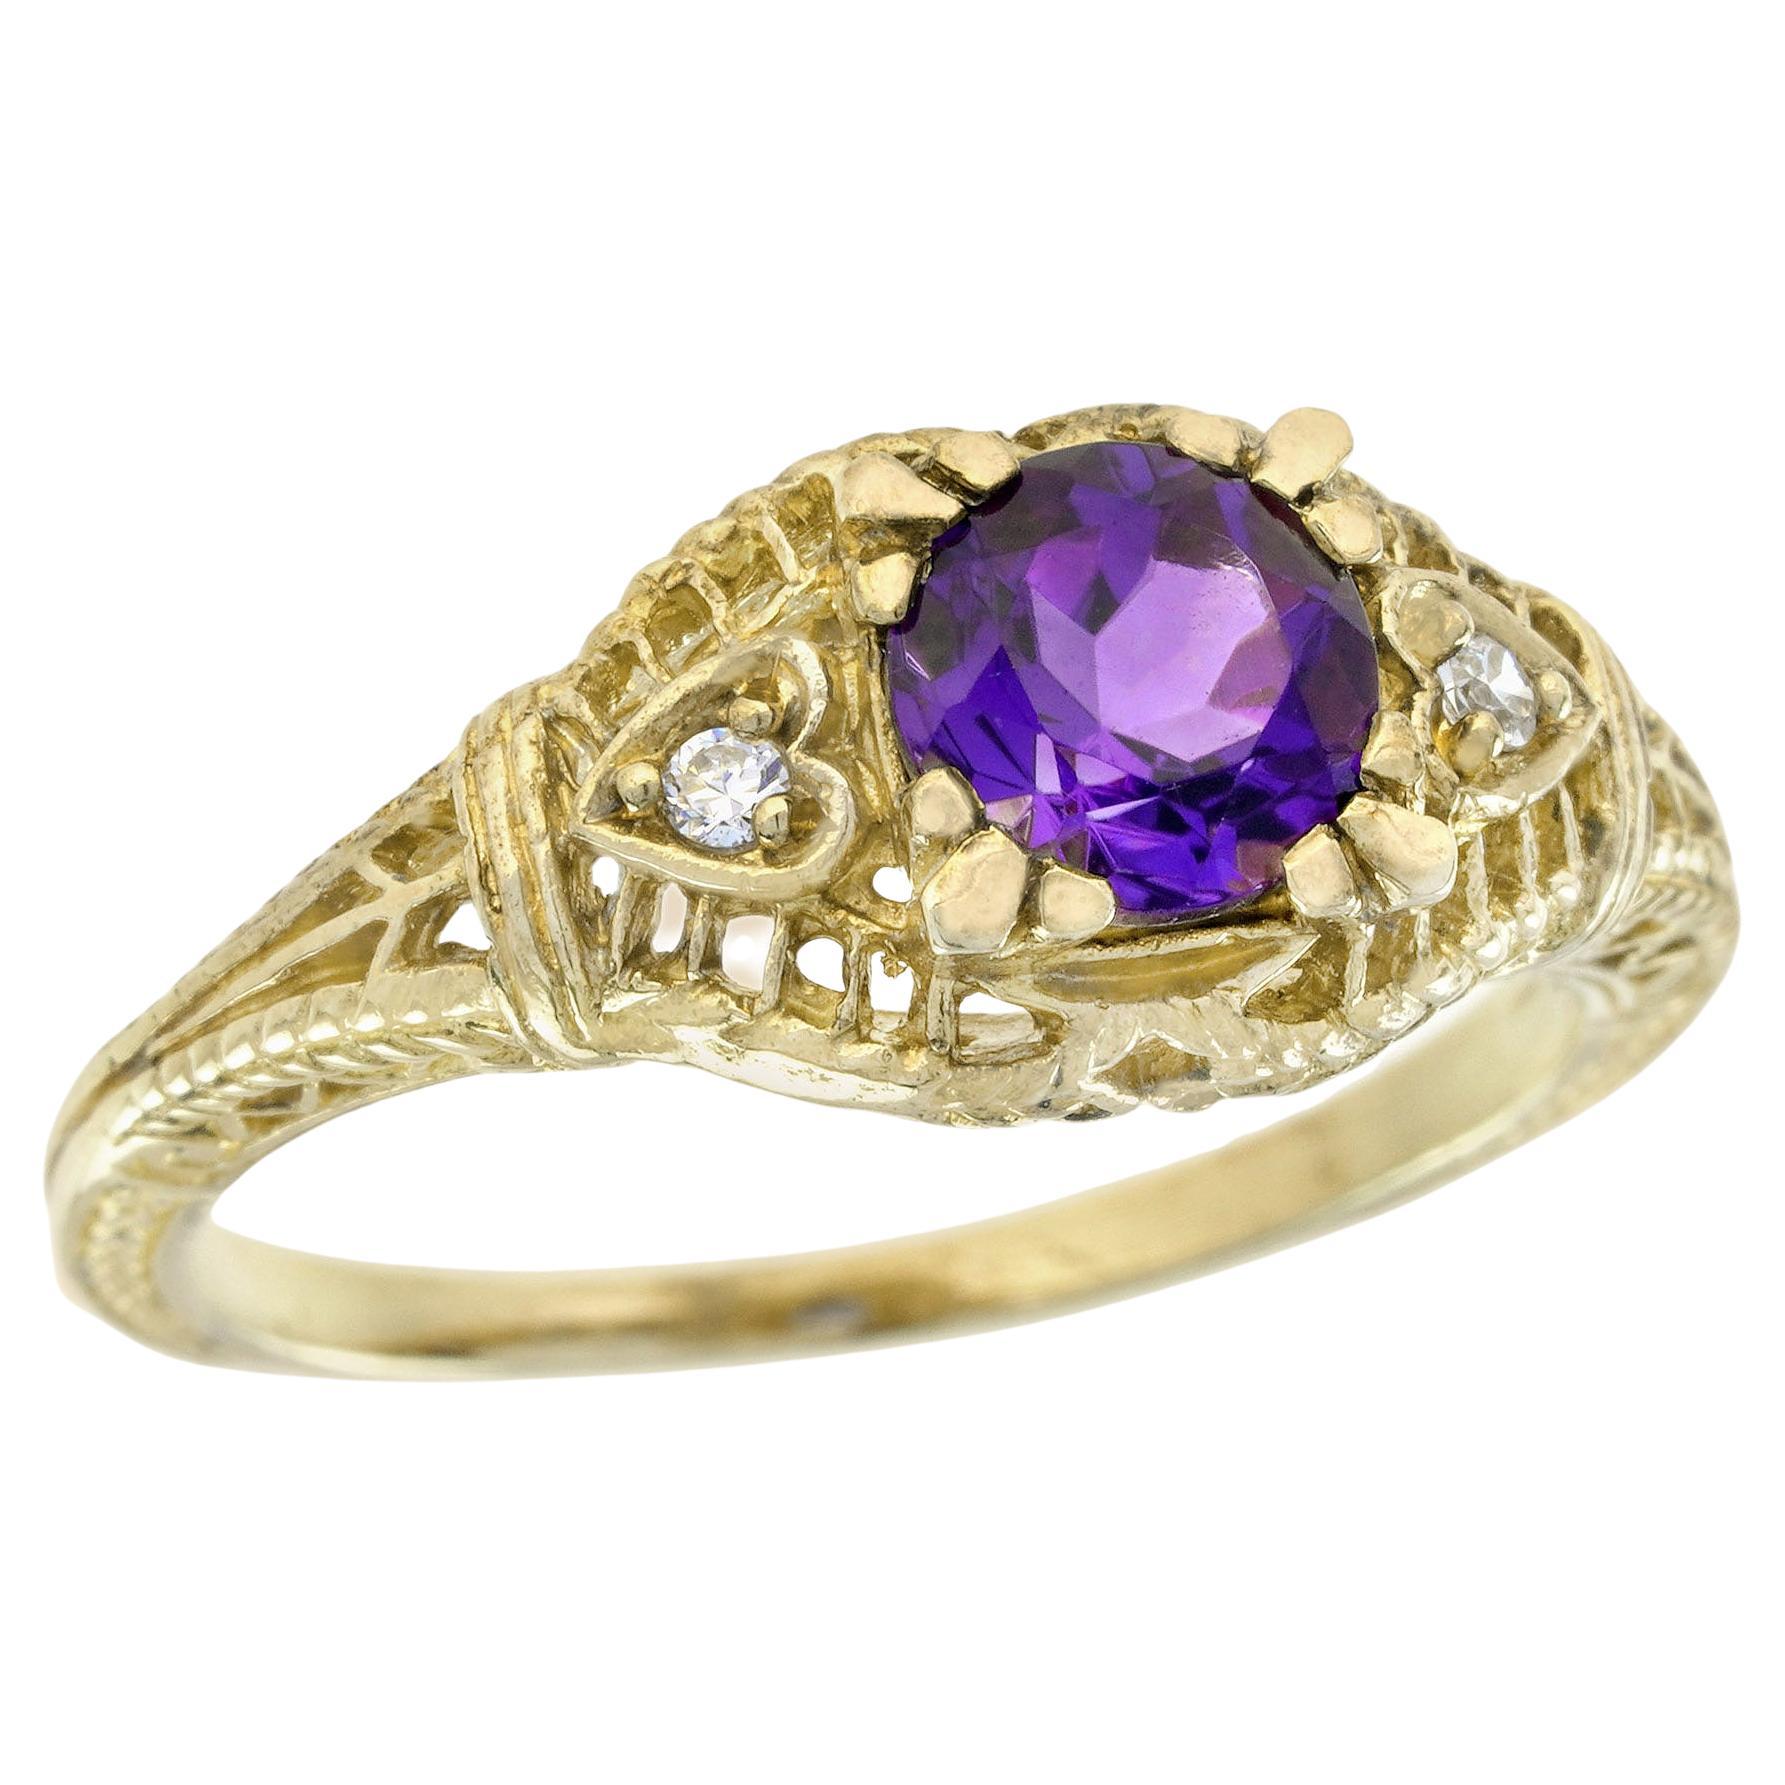 Natural Amethyst and Diamond Vintage Style Filigree Ring in Solid 9K Yellow Gold